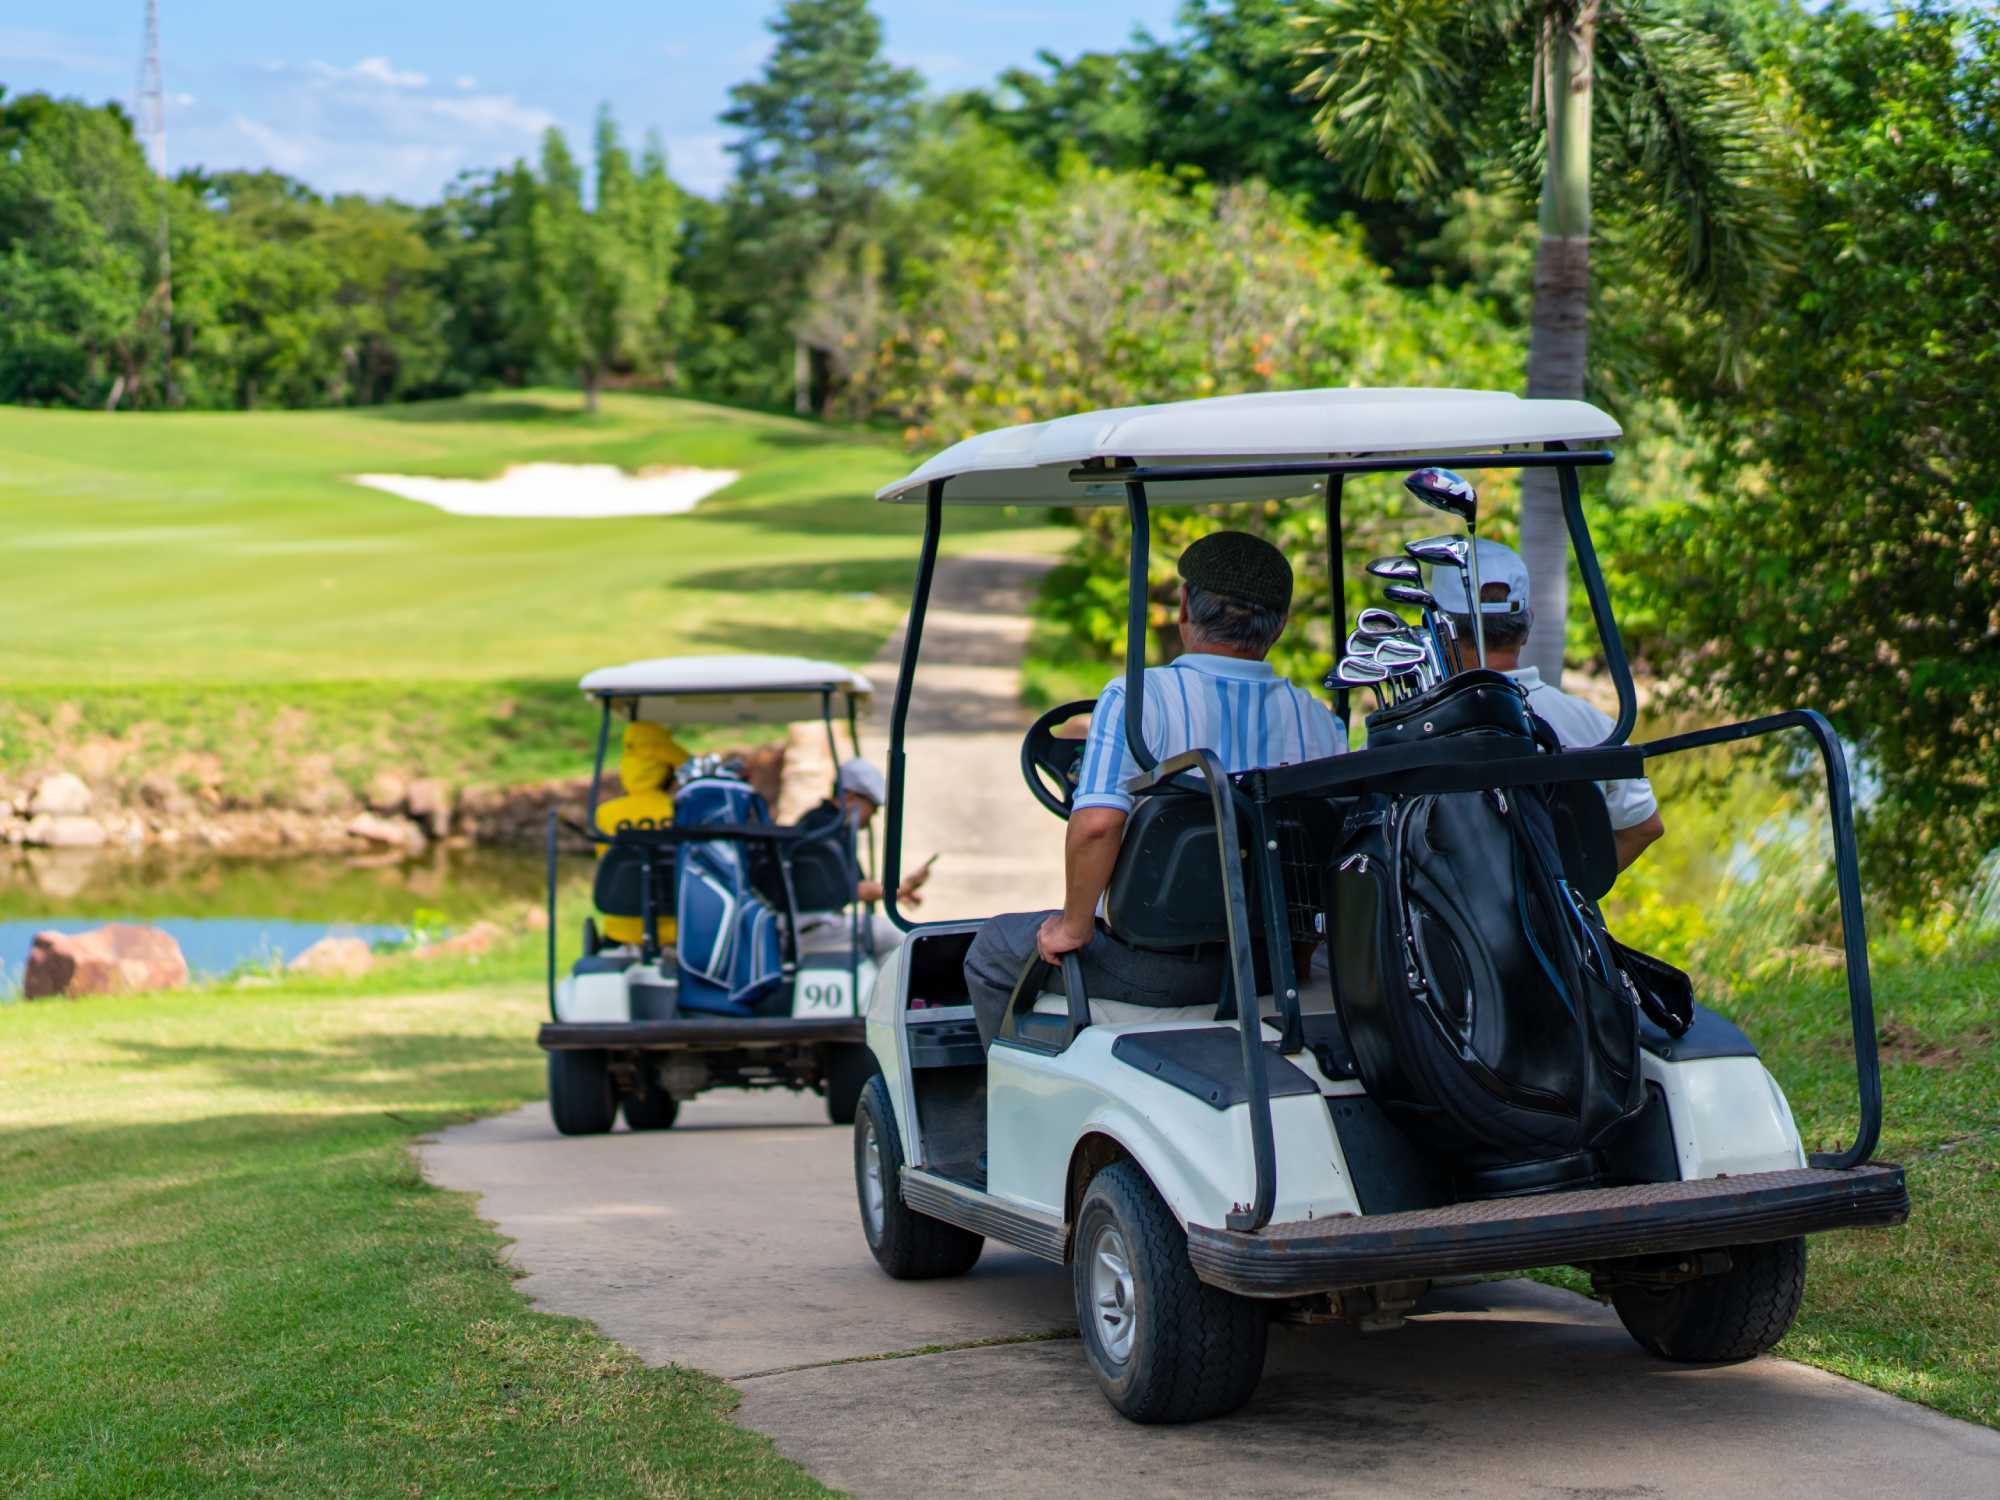 A group of daytime golfers enjoying a hot summer day on the course, cruising on their golf carts.